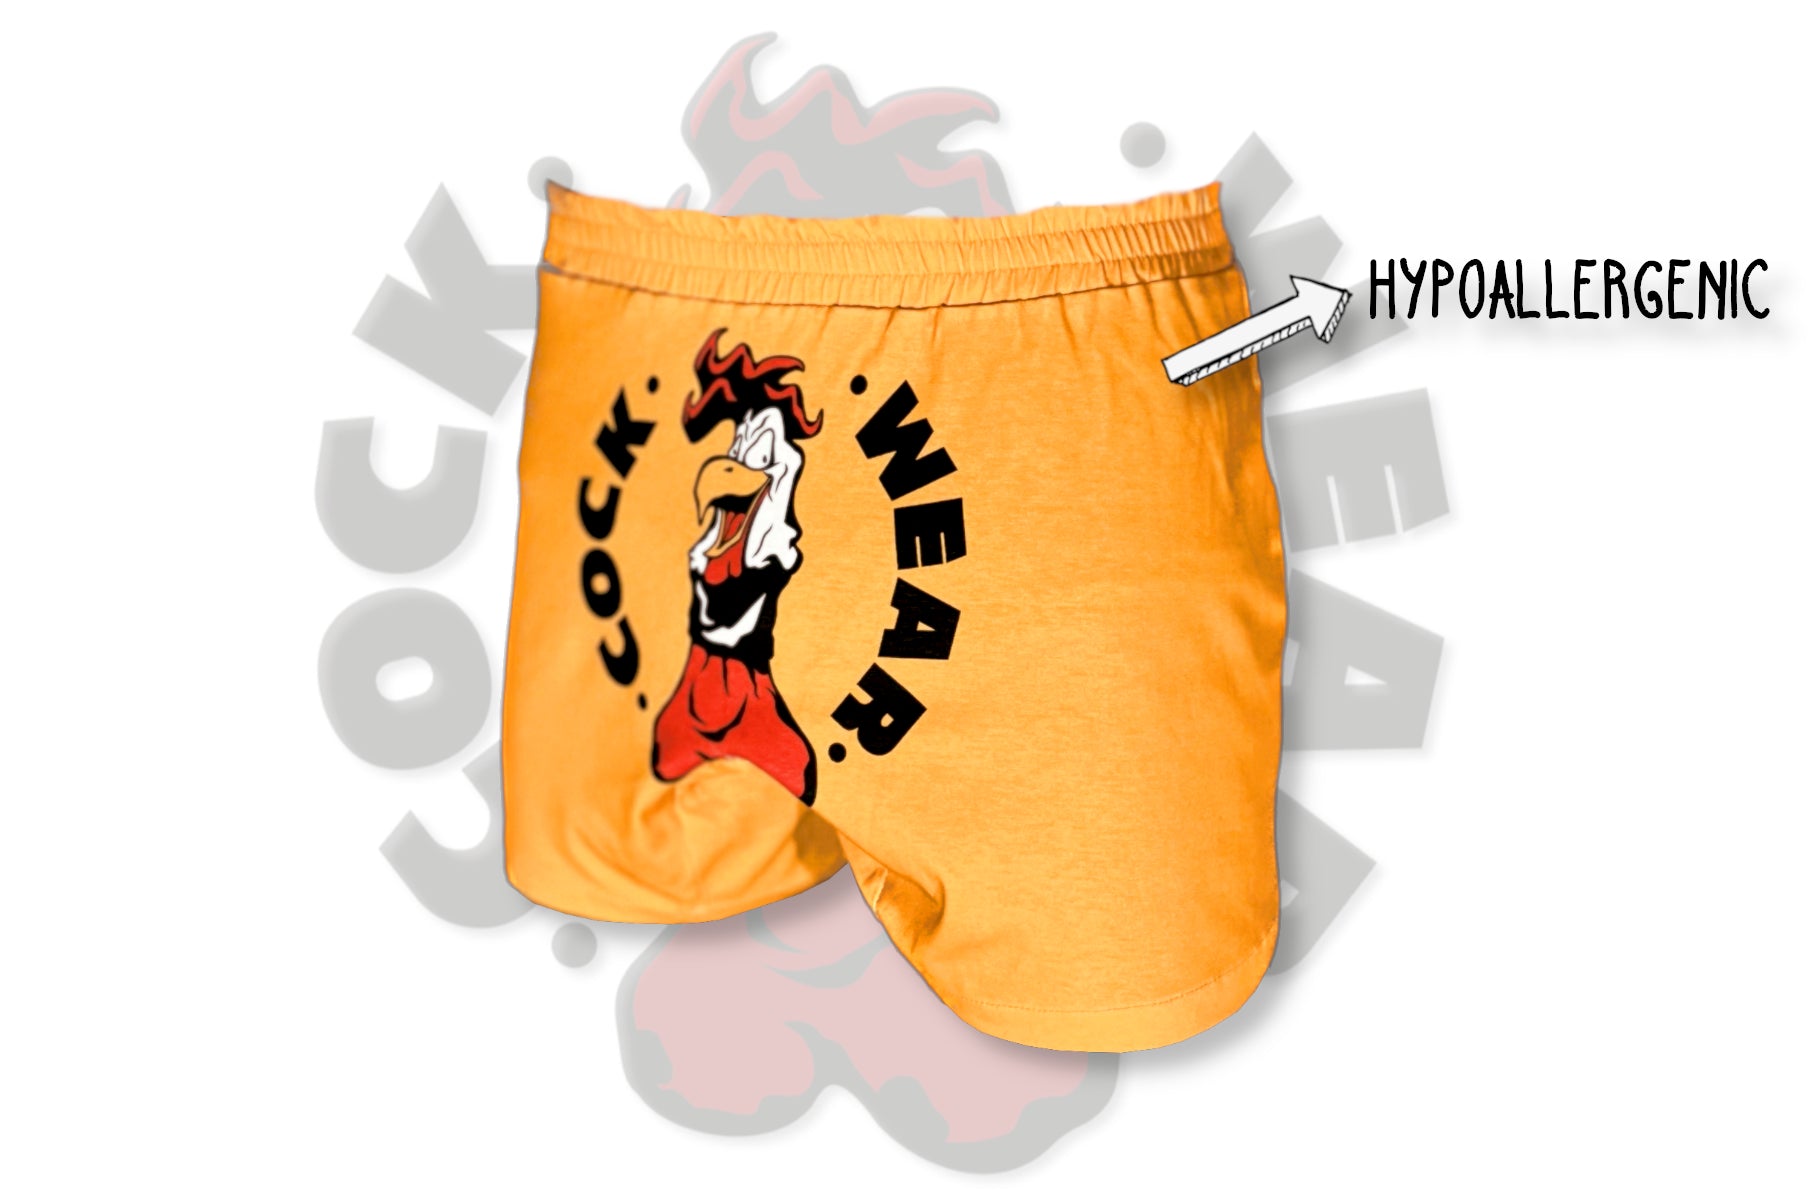 YELLOW COCK WEAR™ + COCK WEAR™ SHORTS PACK